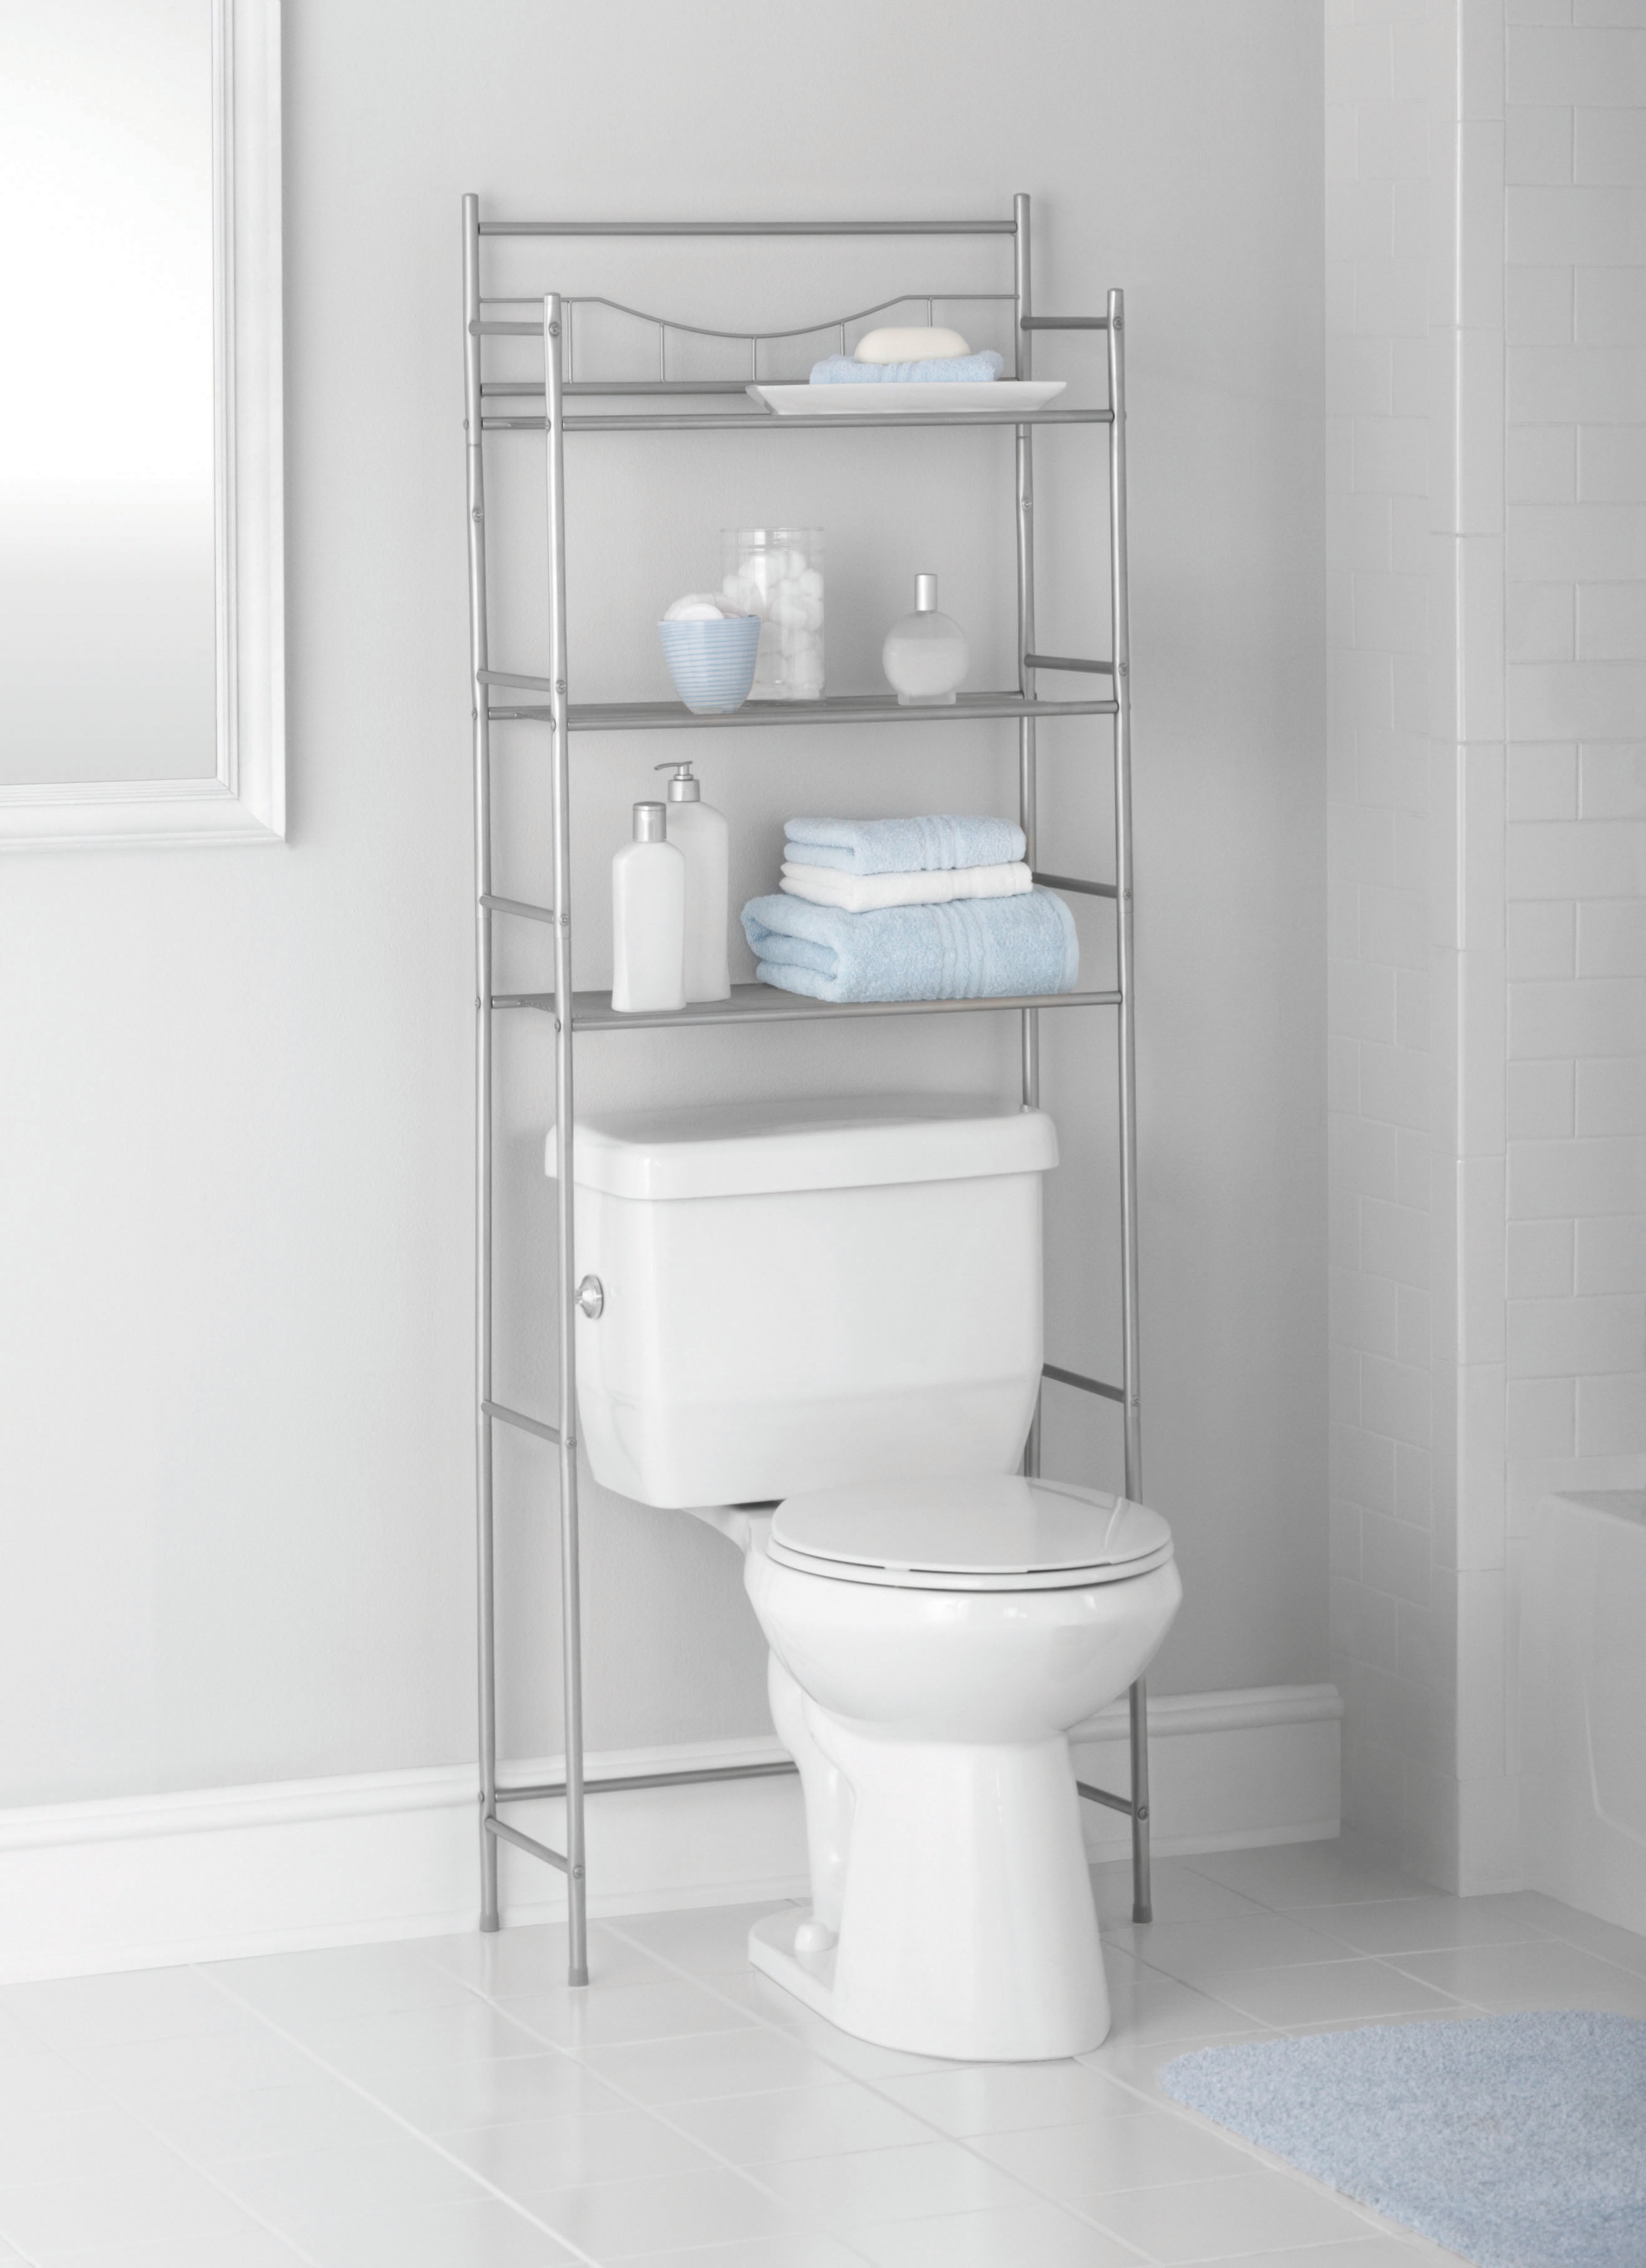 Mainstays 3-Shelf Bathroom over the Toilet Space Saver with Liner, Satin Nickel for Adults - image 1 of 8